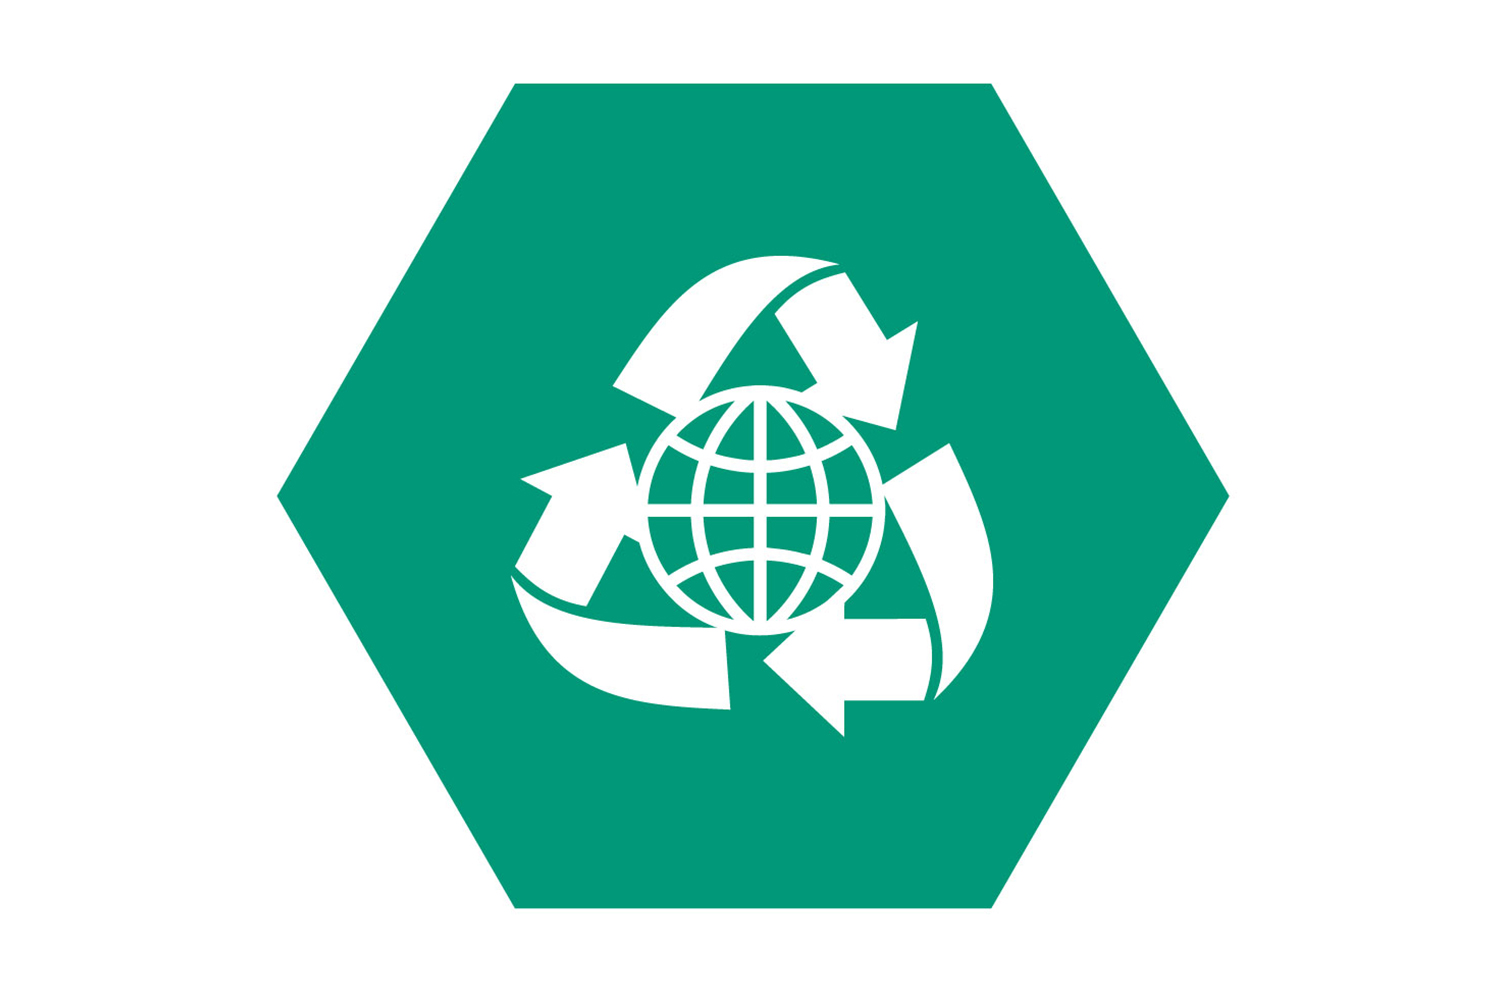 Hexagonal icon with recycling symbol represents the business field Recycling and Environment